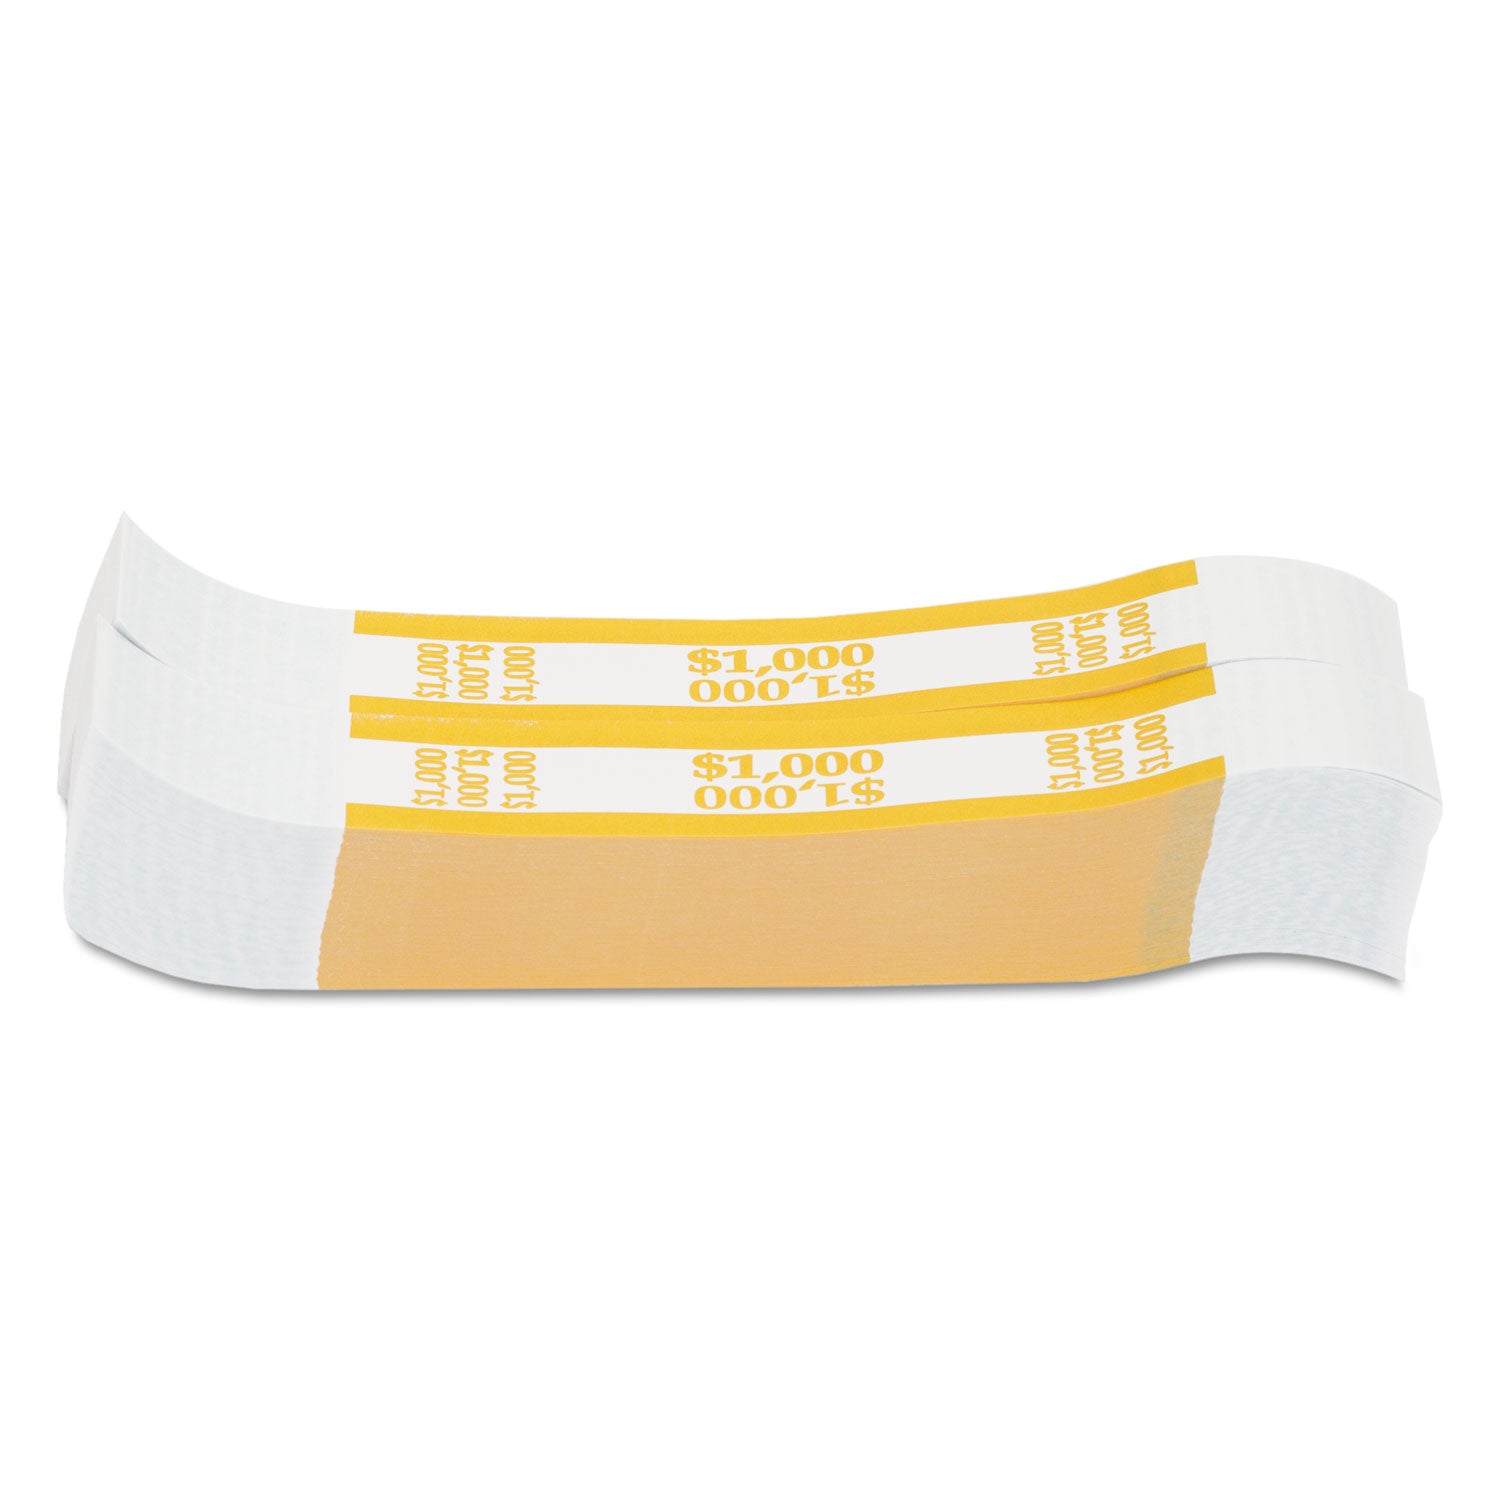 Currency Straps, Yellow, $1,000 in $10 Bills, 1000 Bands/Pack - 